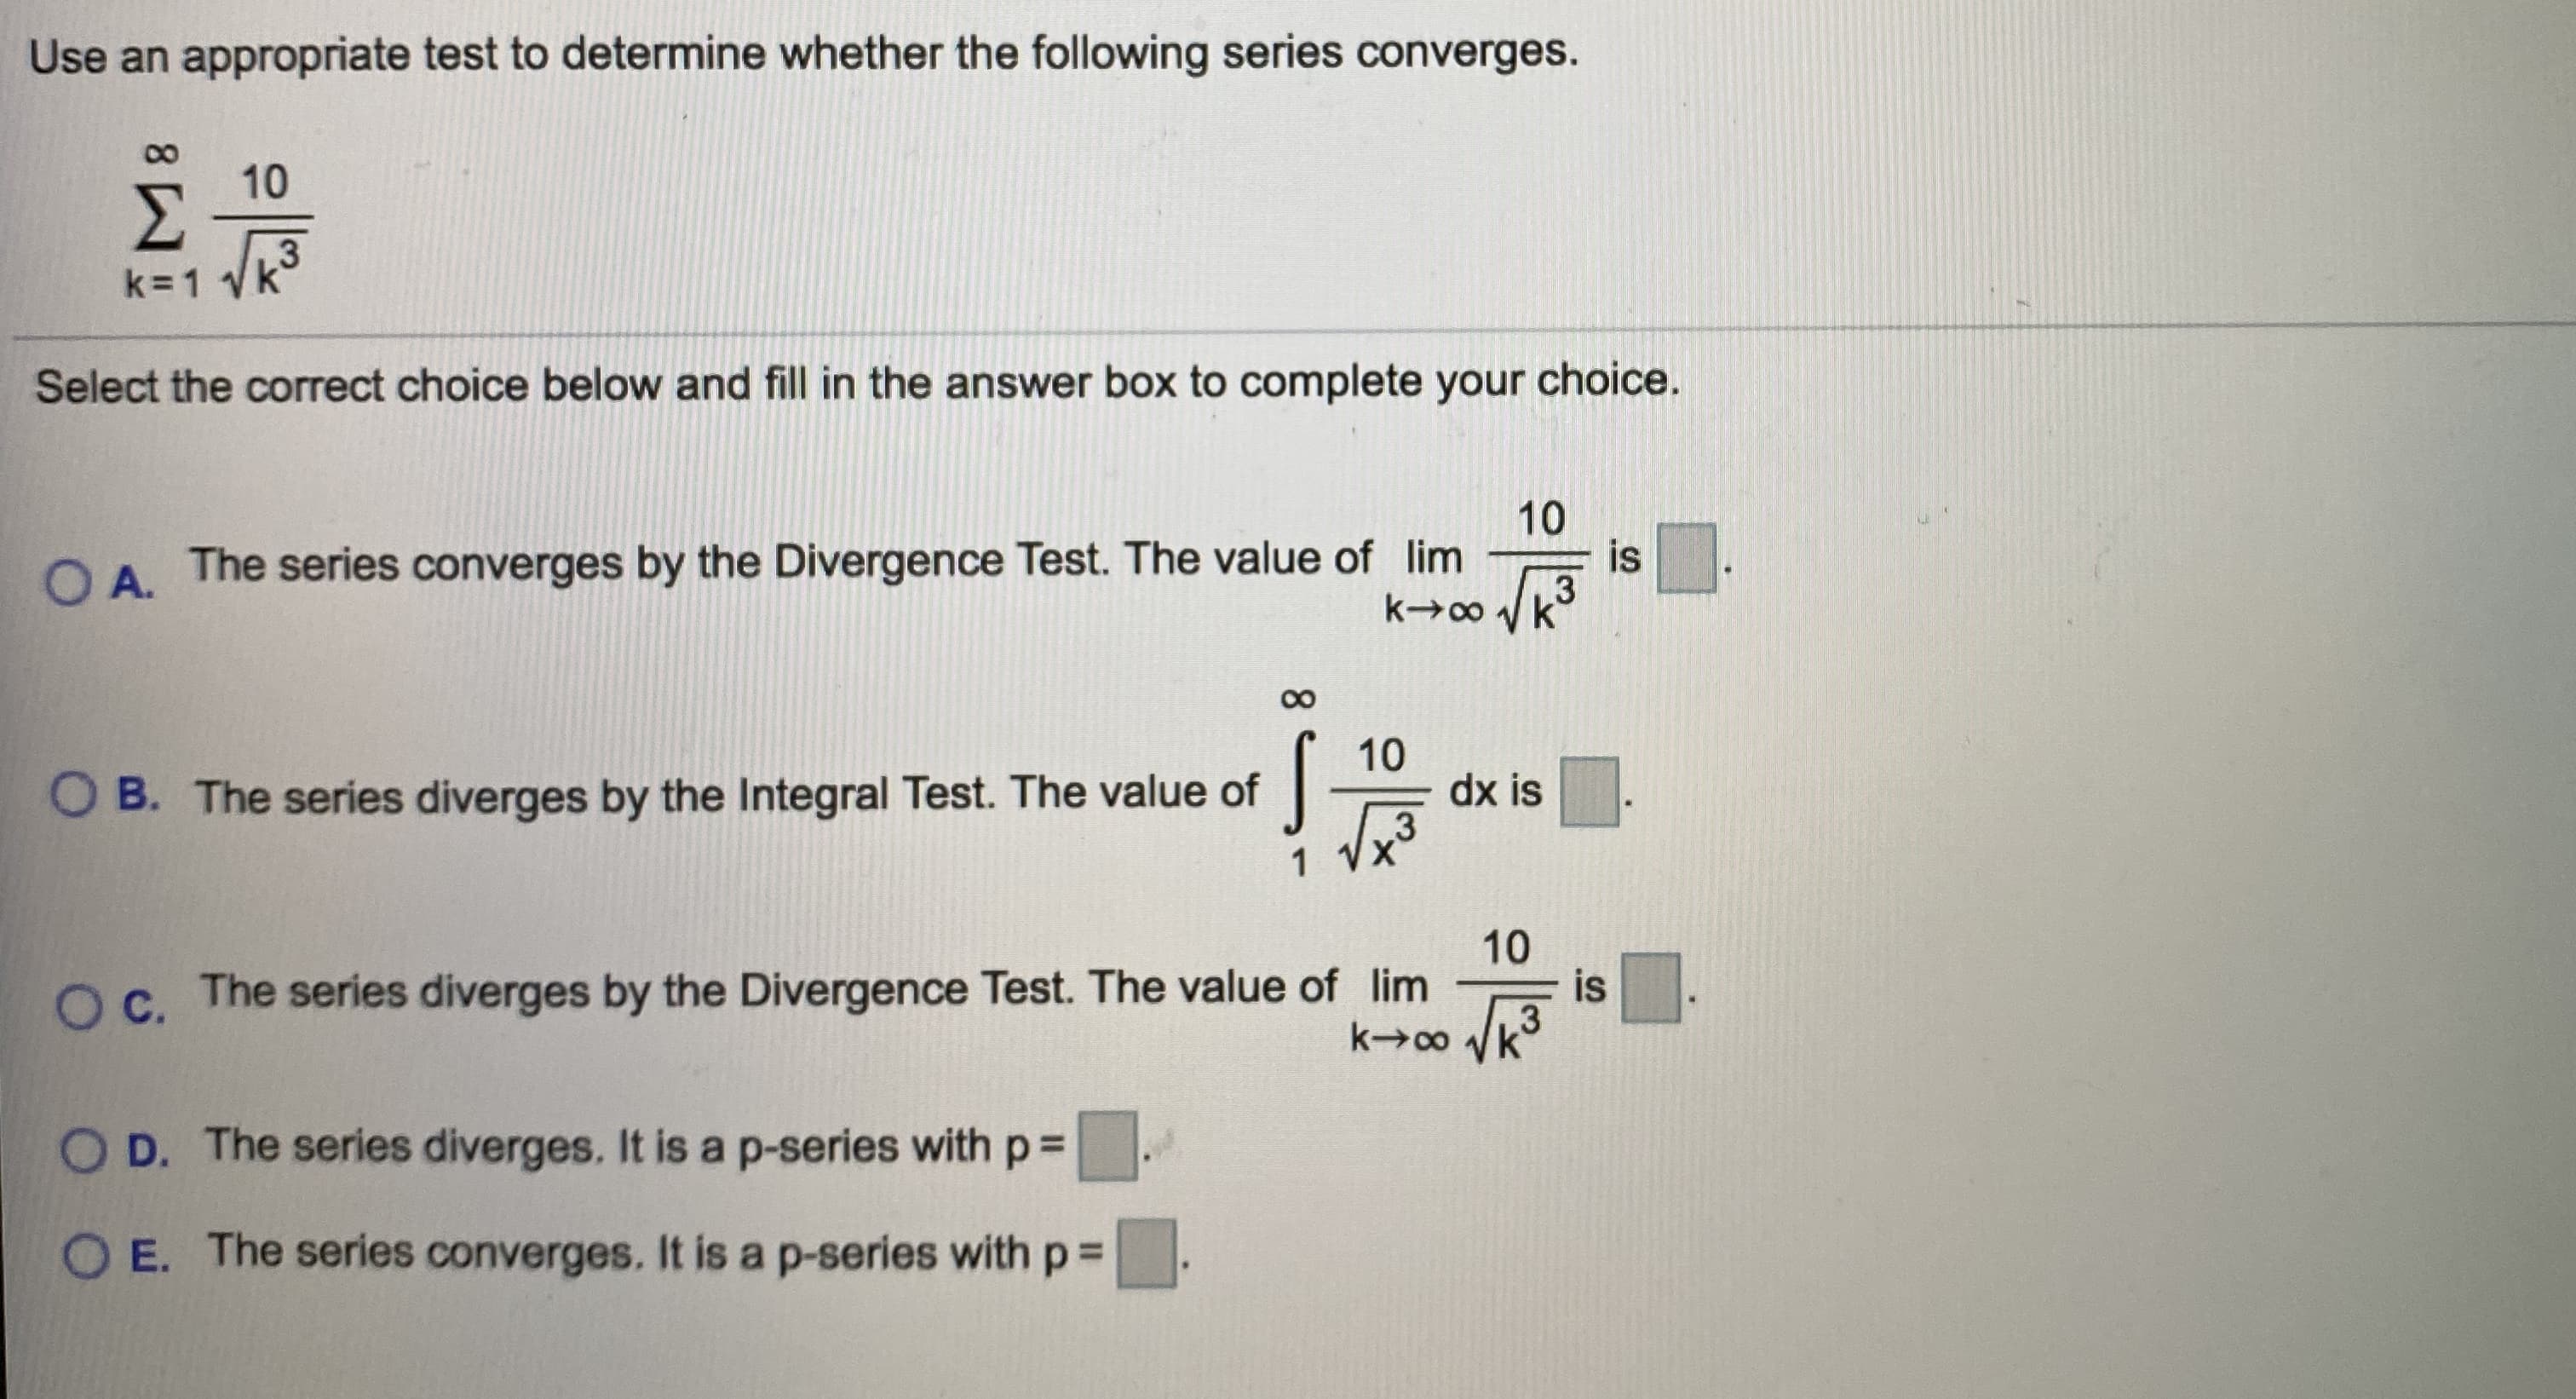 Use an appropriate test to determine whether the following series converges.
10
Σ
k=1 k
